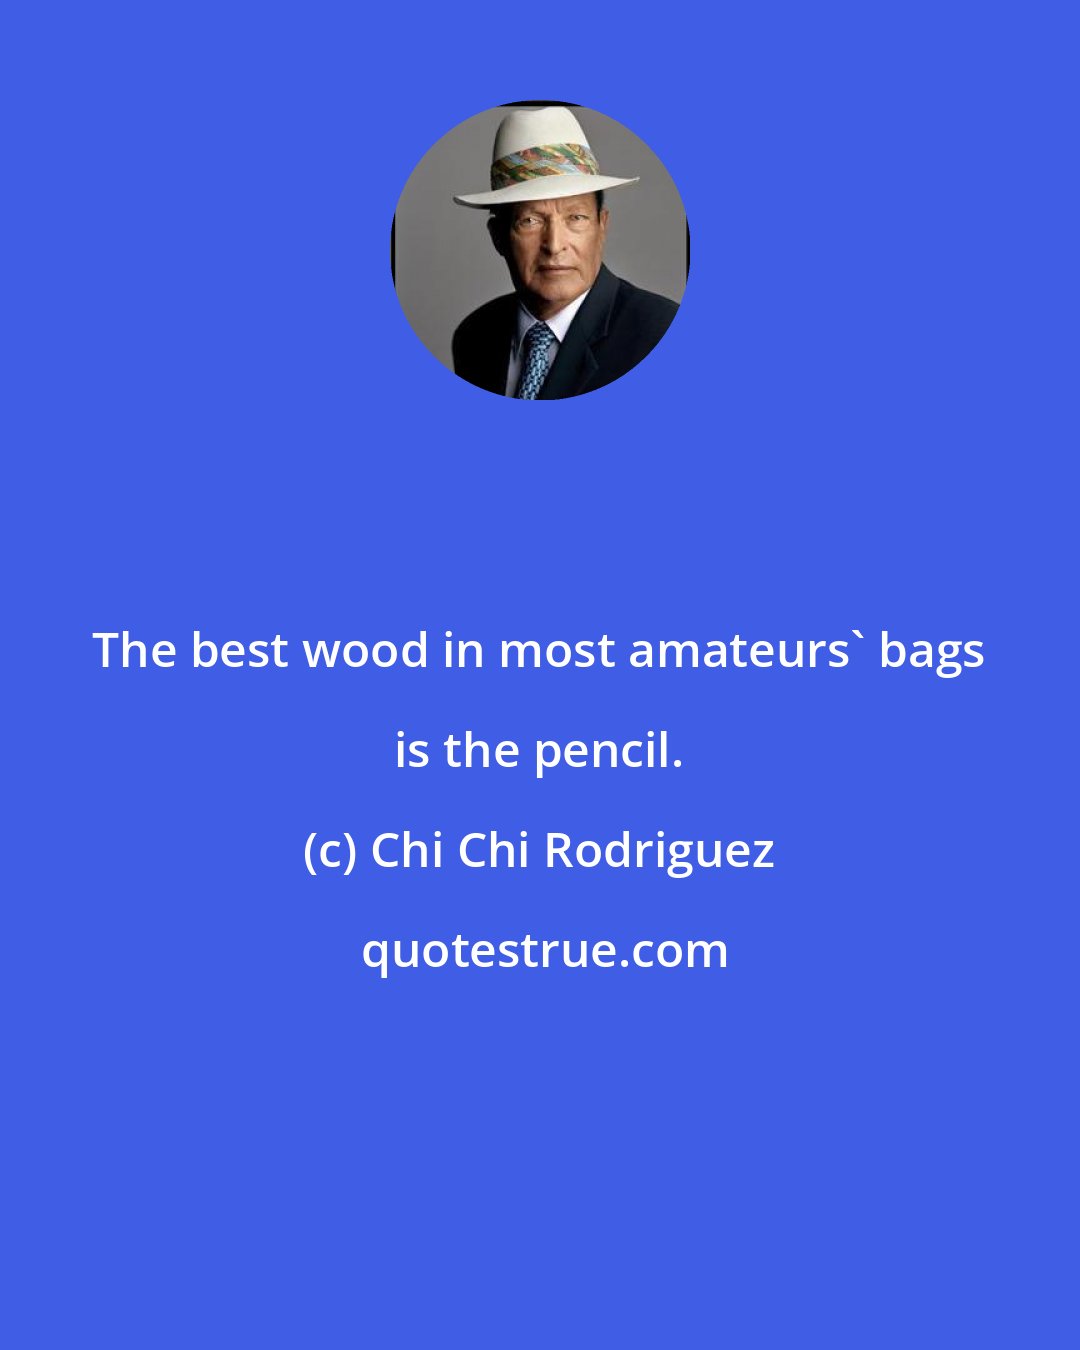 Chi Chi Rodriguez: The best wood in most amateurs' bags is the pencil.